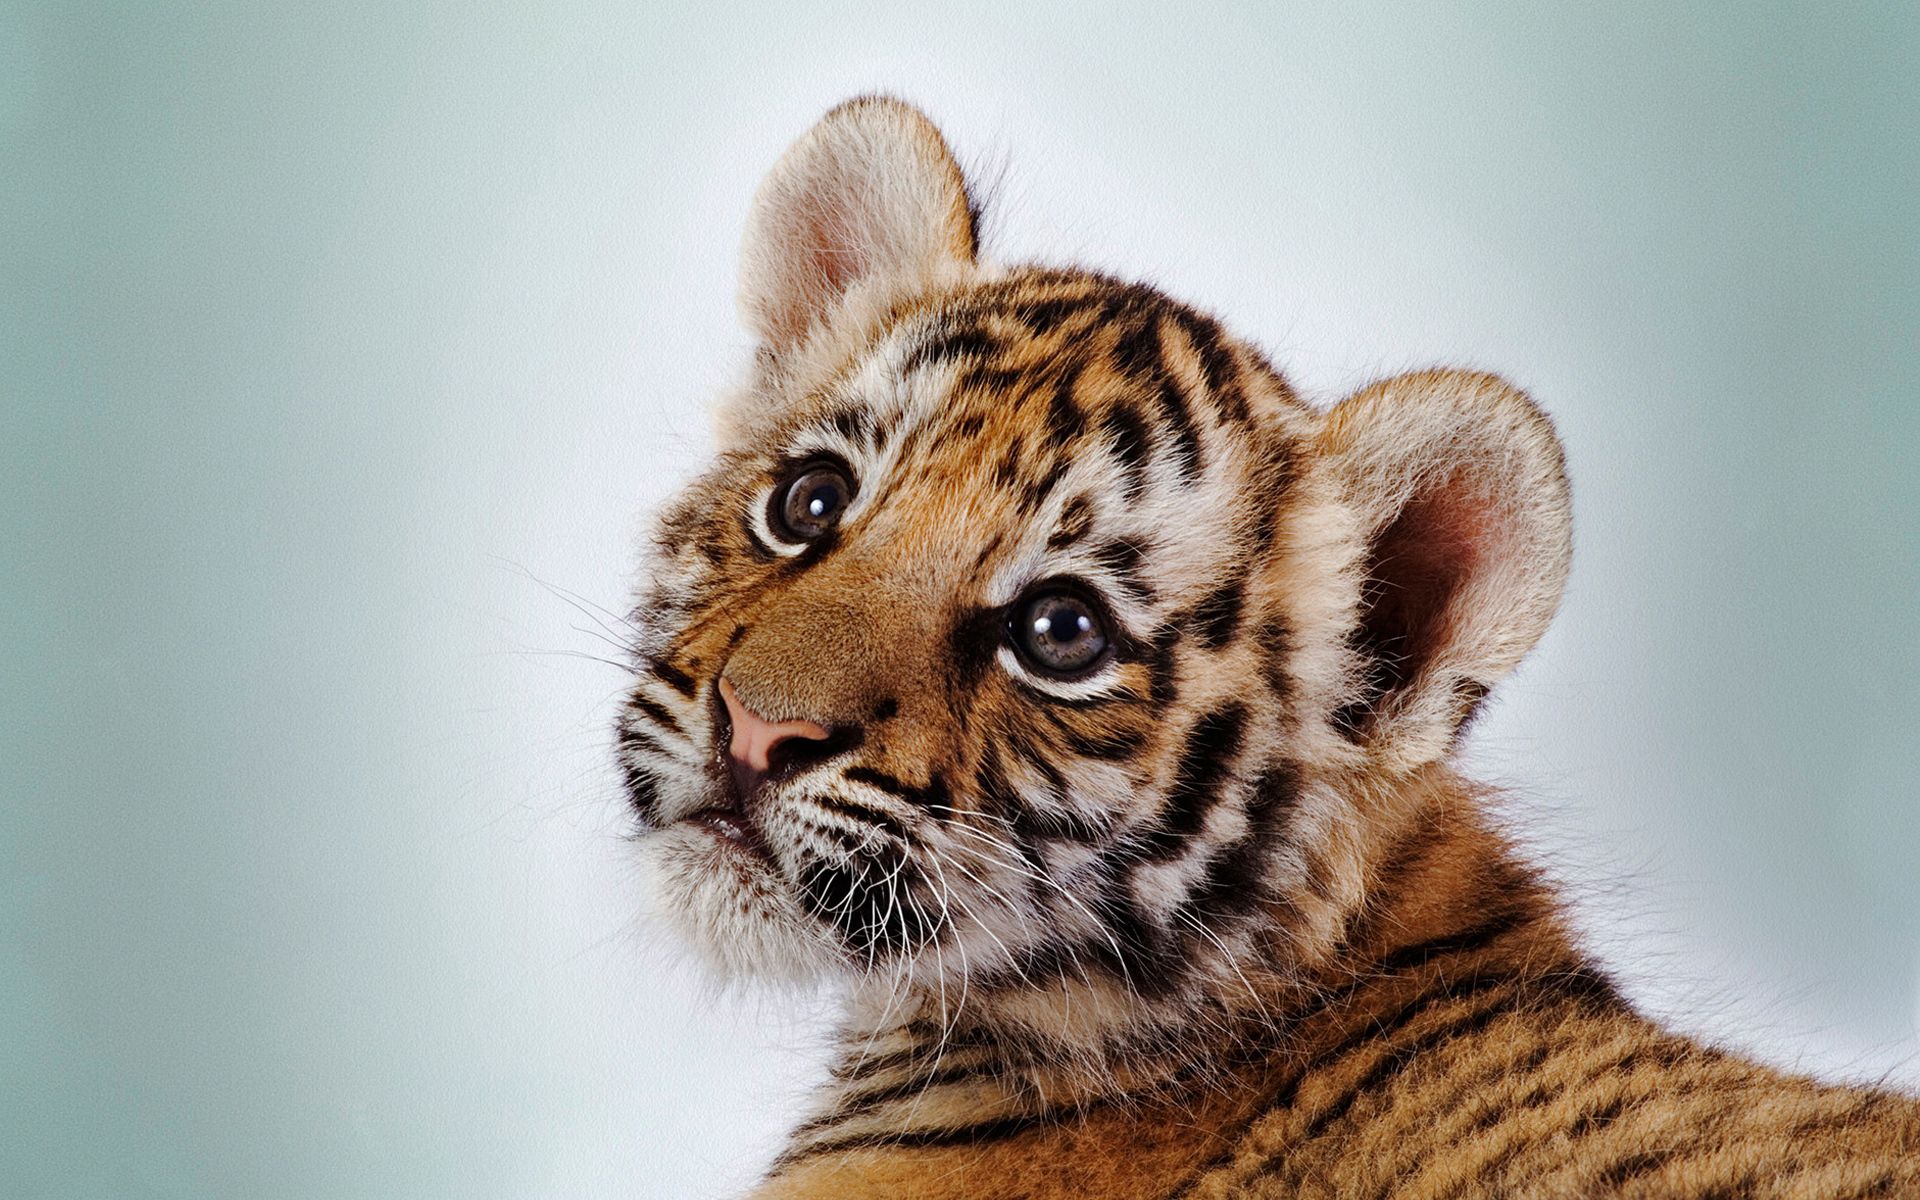 tiger, tiger cub, animals, young, muzzle, striped, kid, tot, joey Aesthetic wallpaper